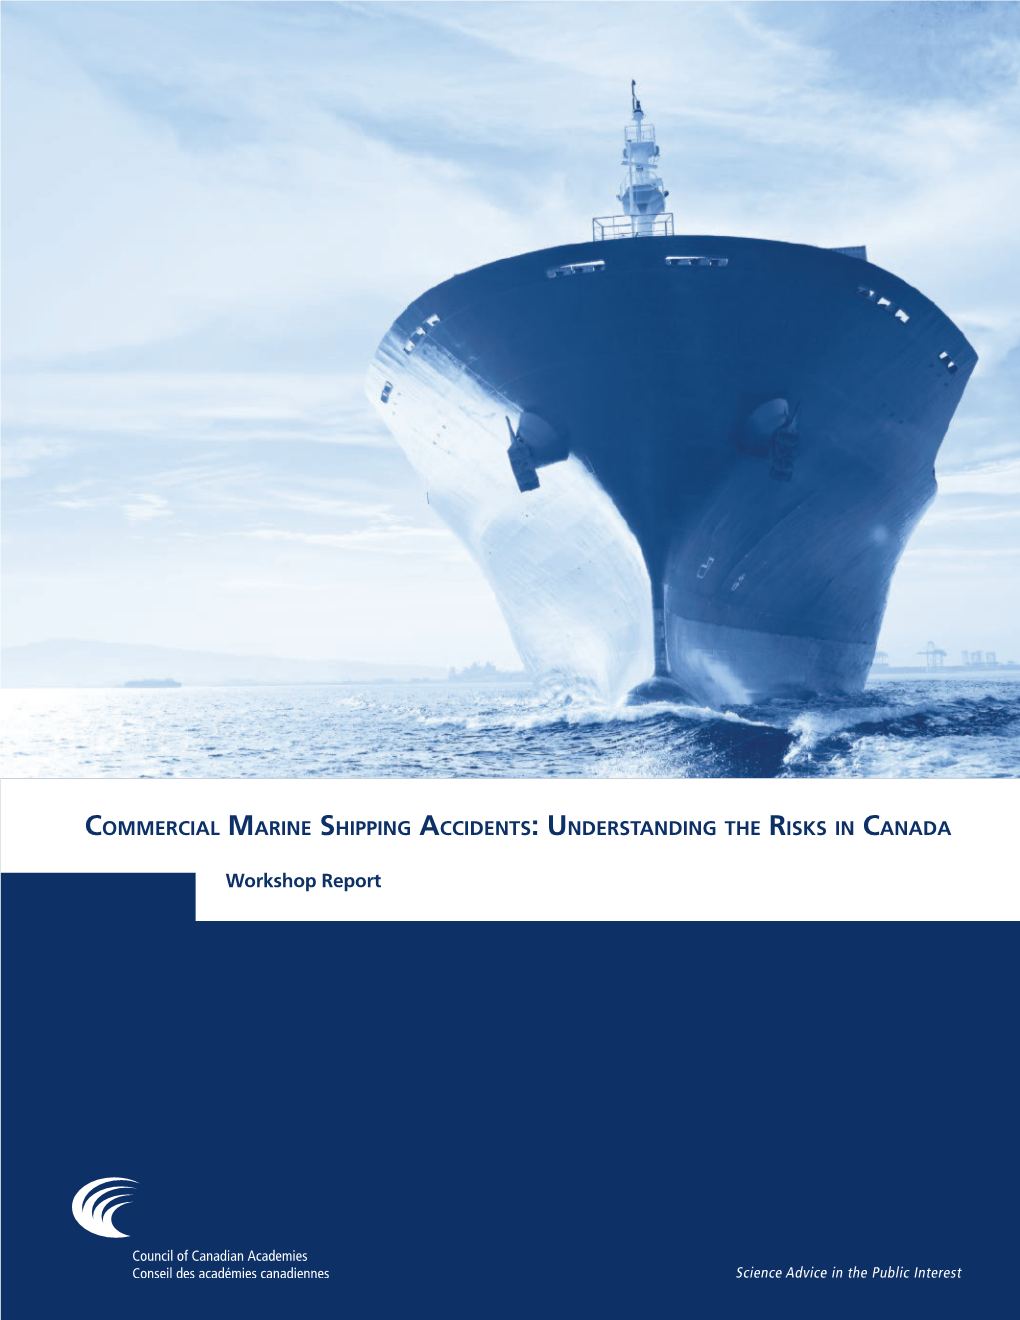 Commercial Marine Shipping Accidents: Understanding the Risks in Canada